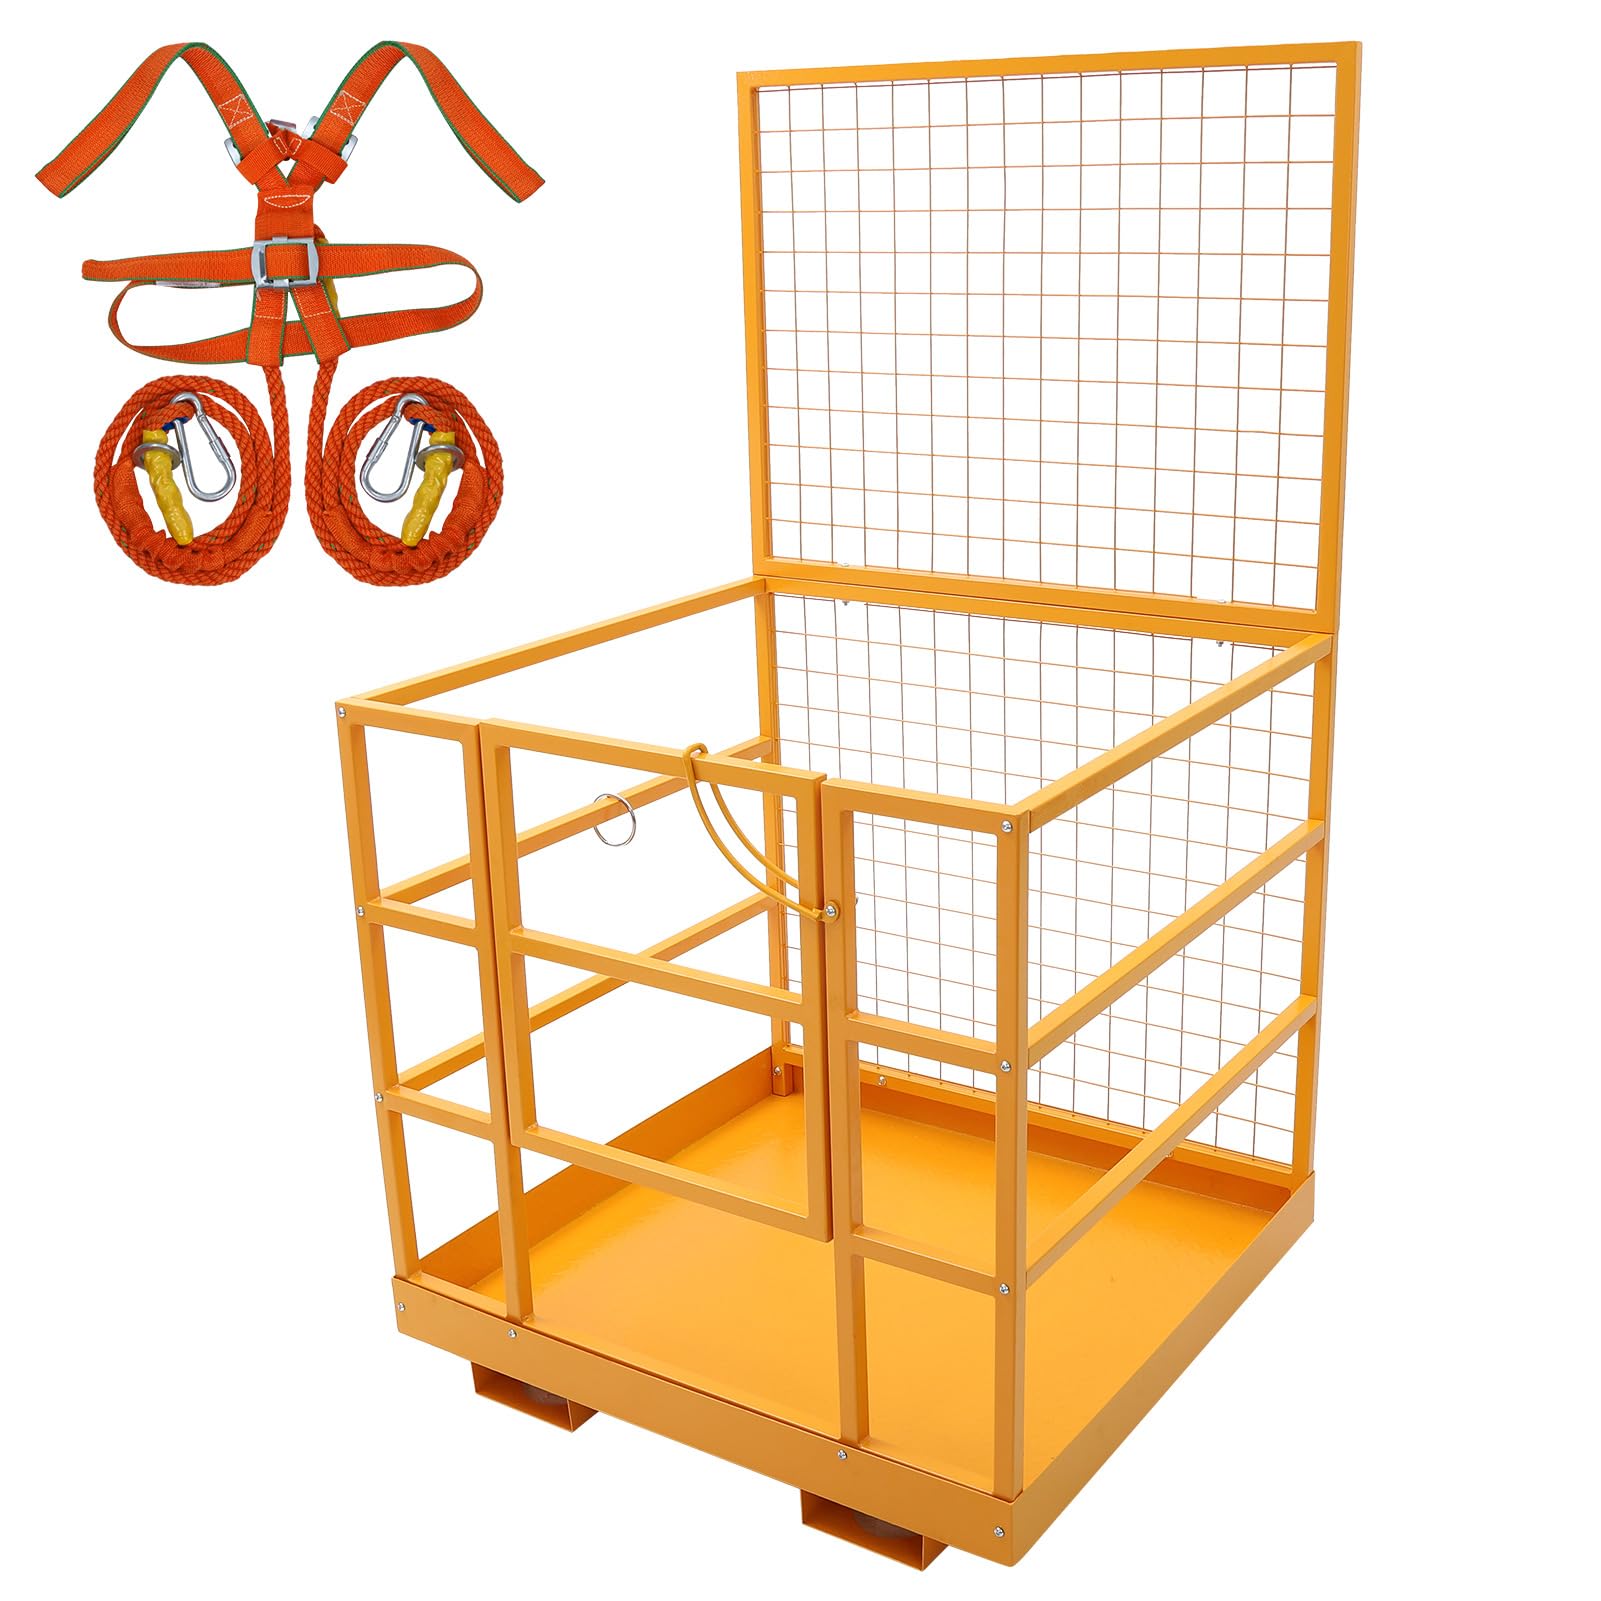 43x45" Forklift Safety Cage, 1400LBS, Heavy Duty Platform